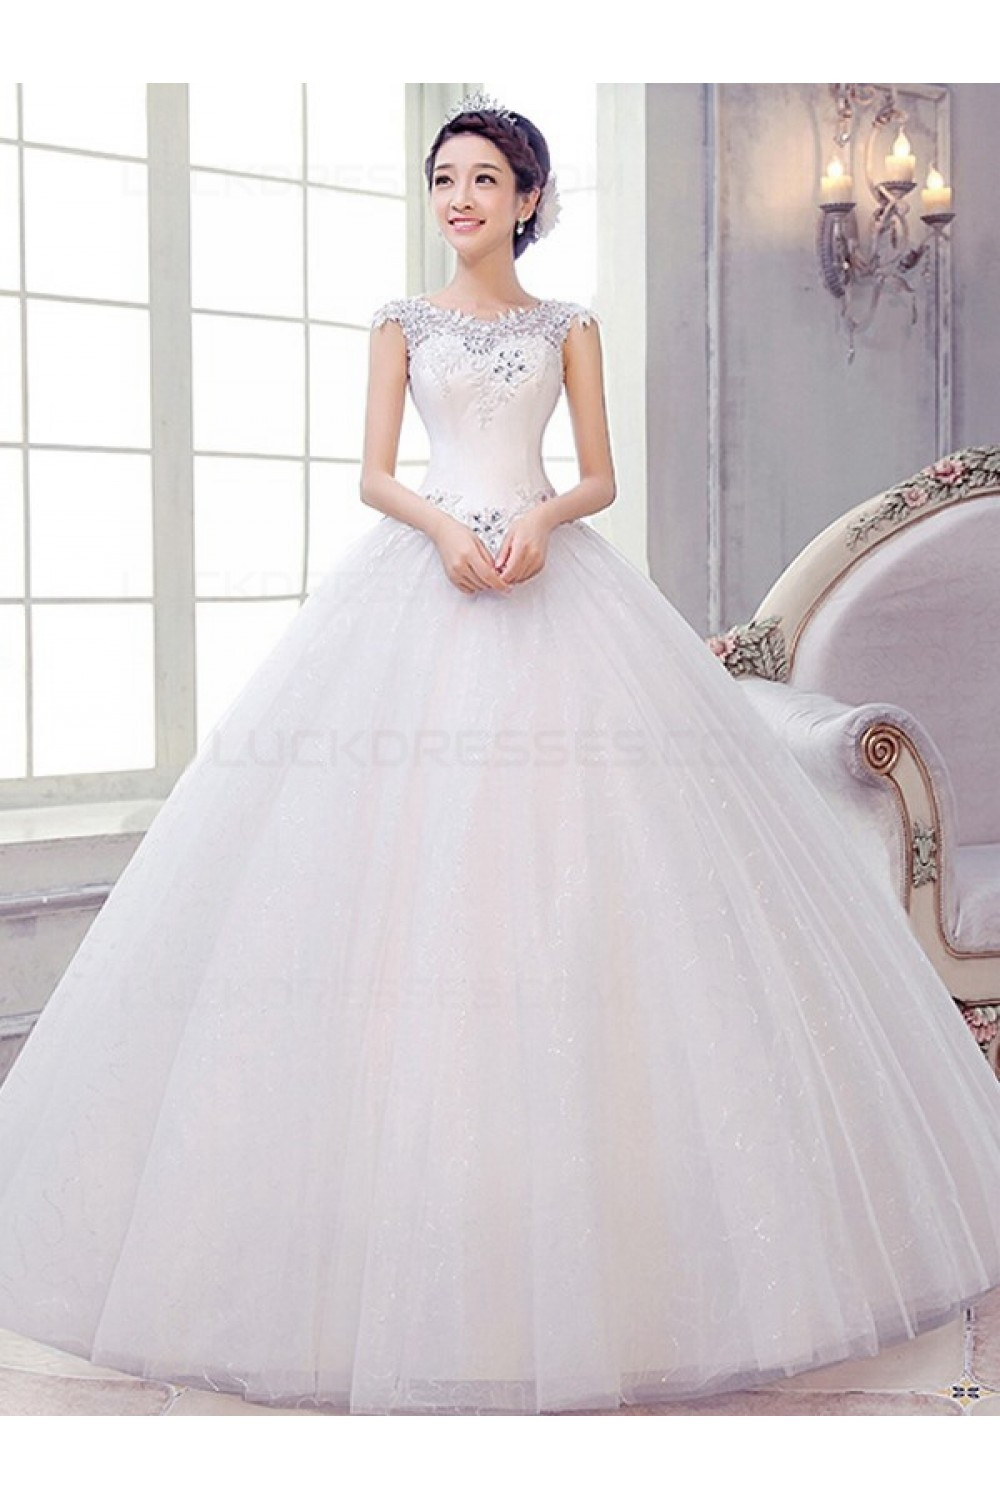 Sweetheart Wedding Gowns
 Ball Gown Sweetheart Lace Wedding Dresses Bridal Gowns